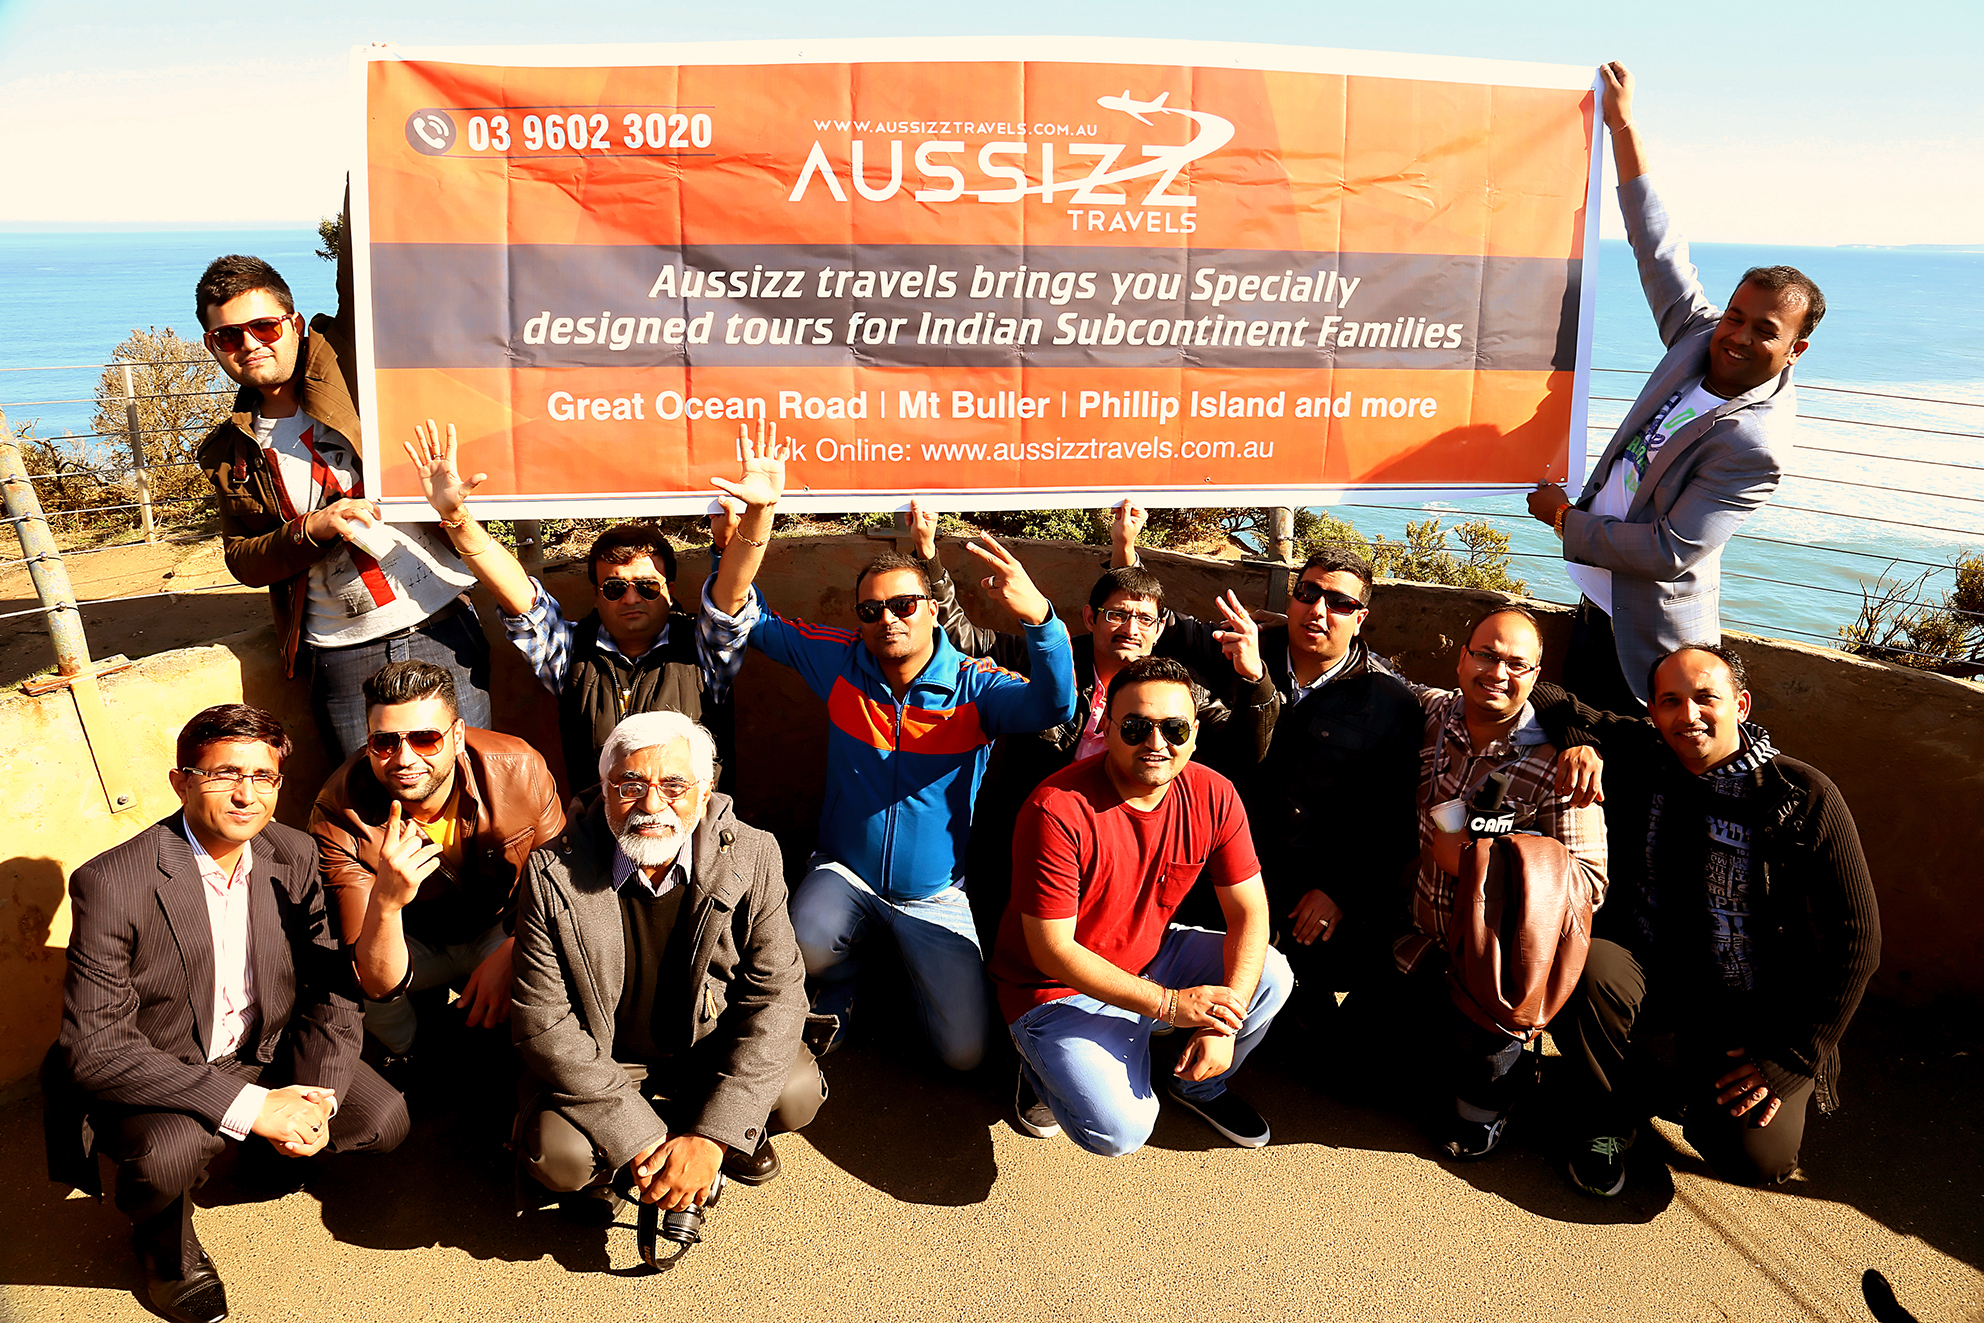 Aussizz travel launched their first travel & tour bus service to Great Ocean Road in Melbourne, Victoria